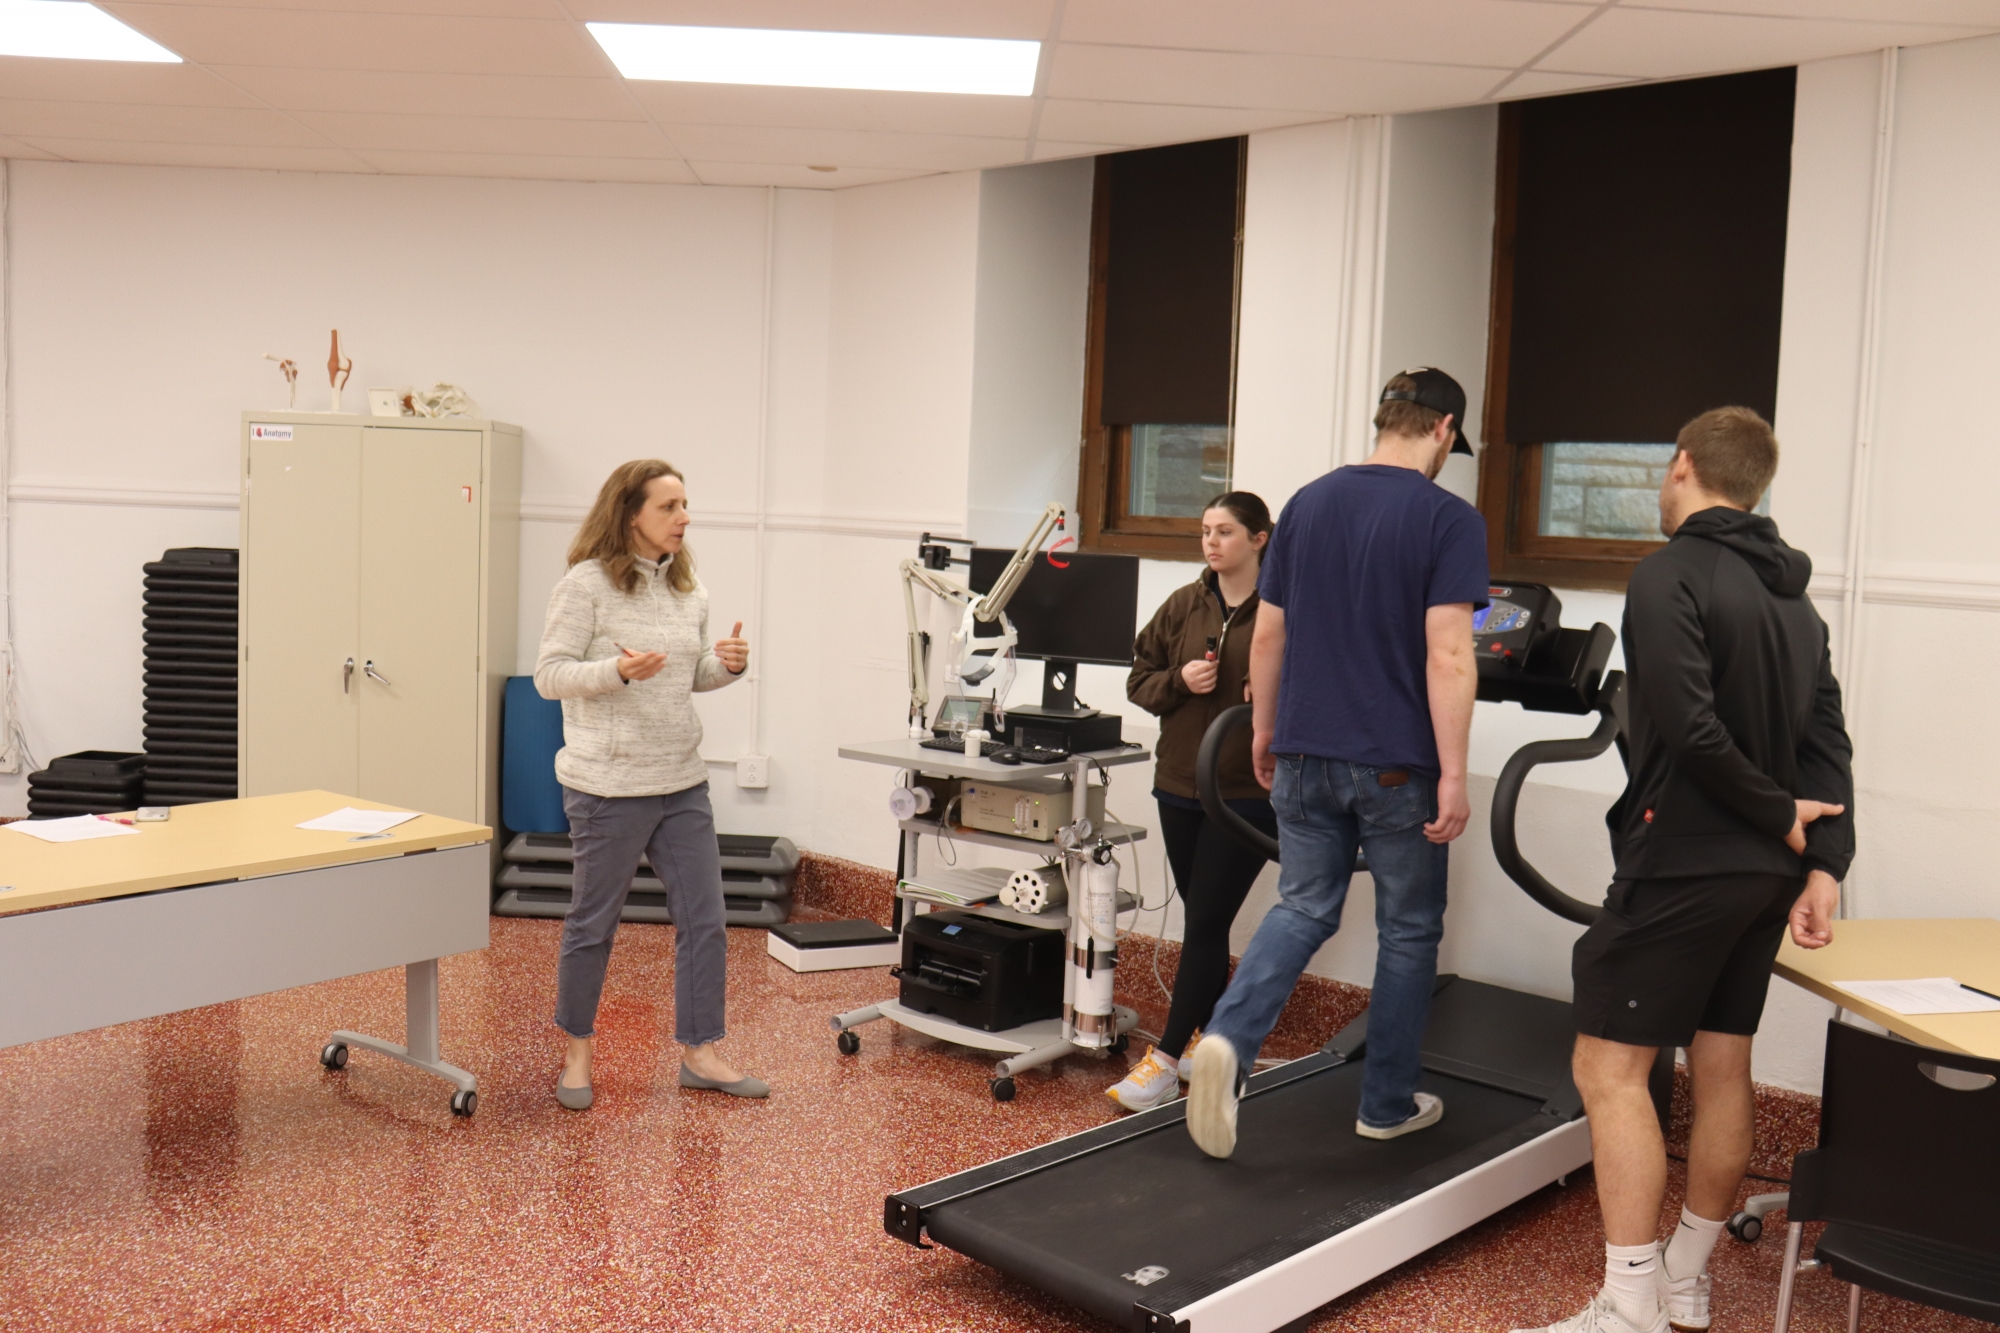 Dr. Carolyn Albright teaches a class in the new lab.